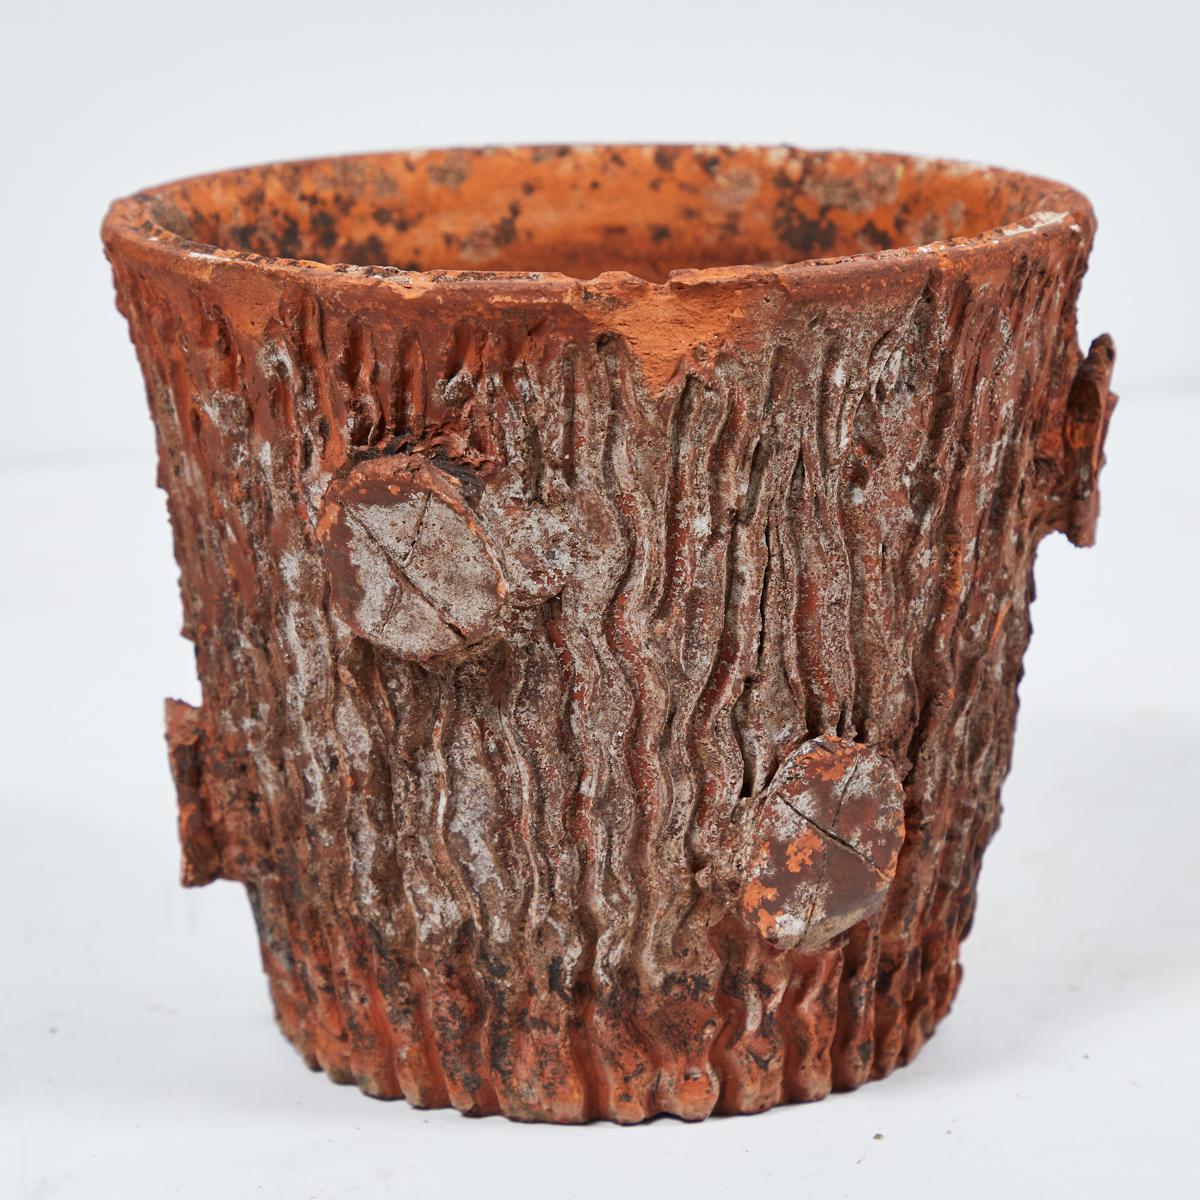 A terracotta pot in the shape of a tree trunk with decorated bark from Watson's Supermarket in England, circa 1950.